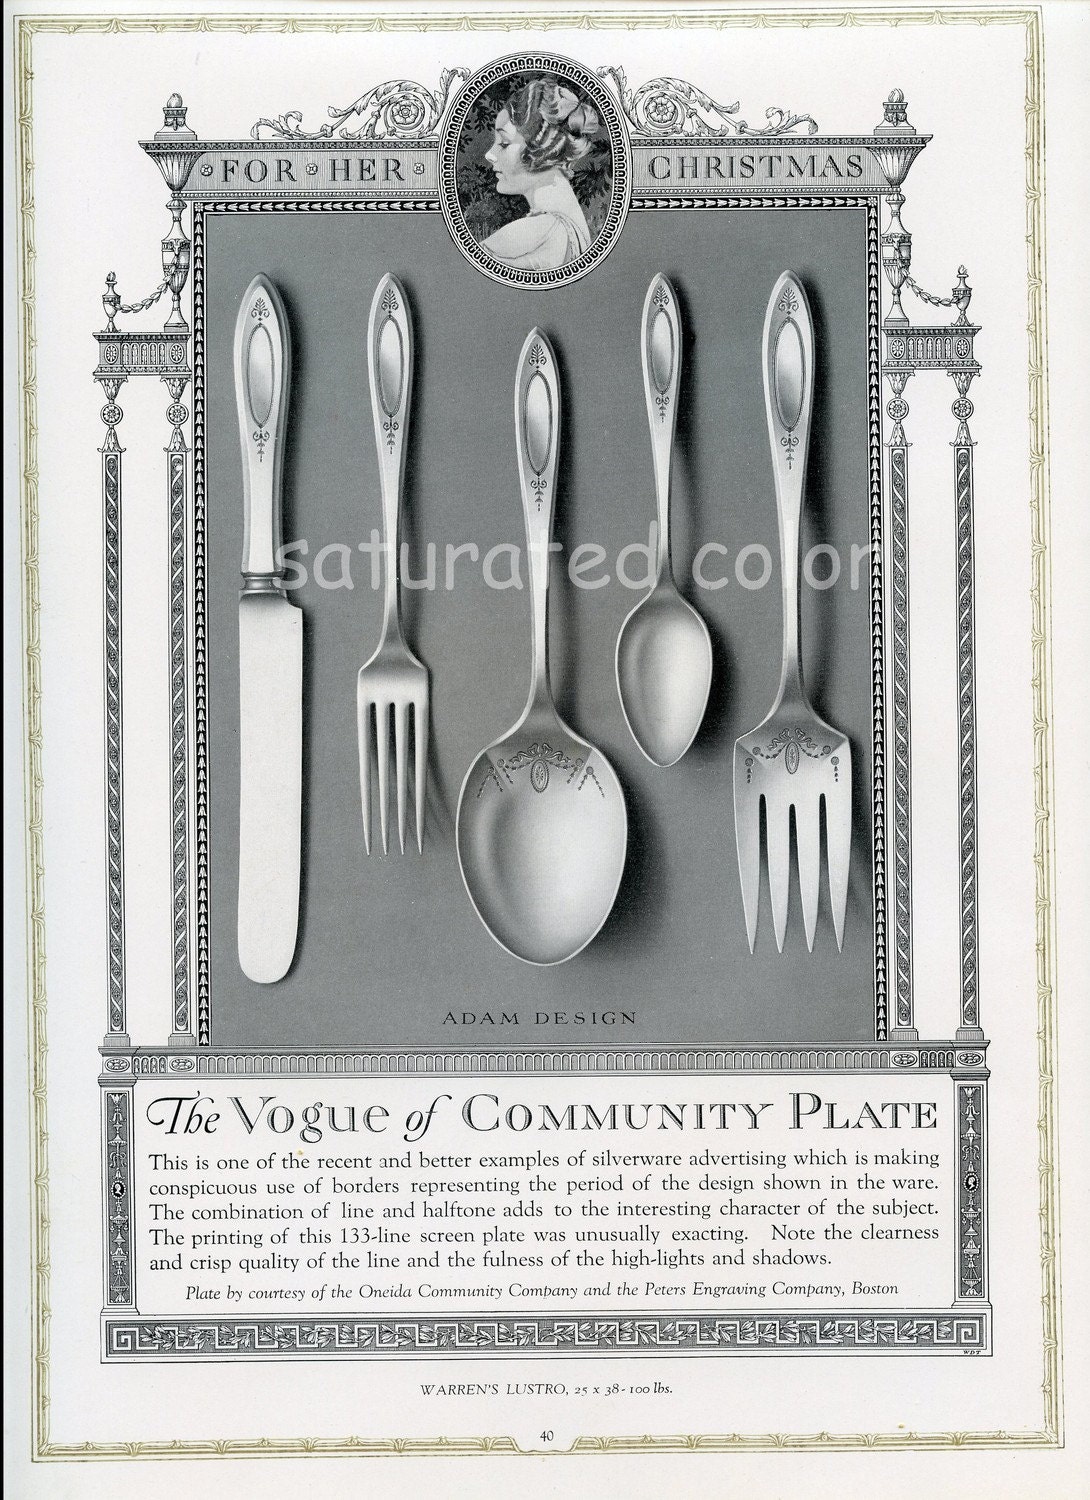 1918  Engraved Oneida Silverplate 5 Piece Place Setting Print  to frame- Peter's Engraving Co. - Boston